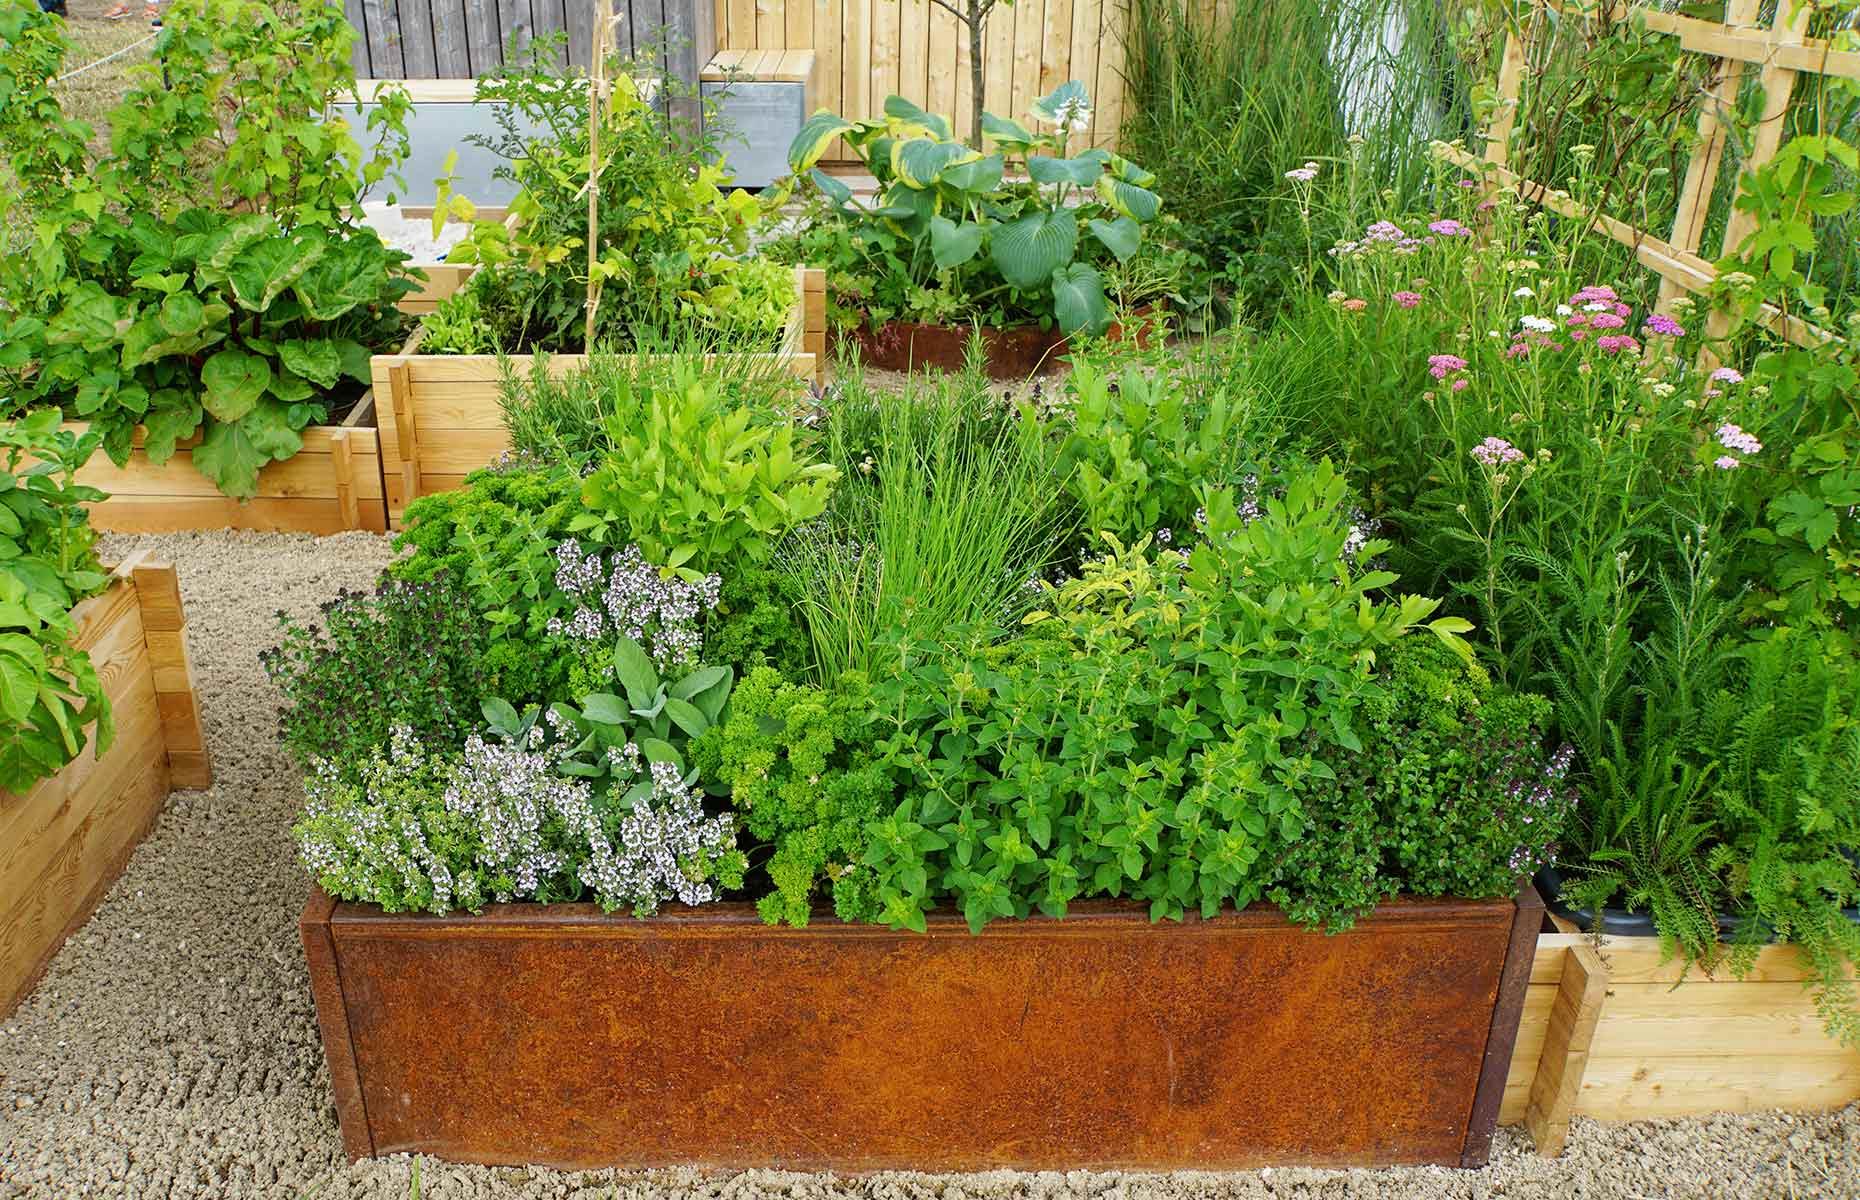 <p>You might think about growing your vegetables in raised beds if you have clay soil which suffers poor drainage. Raised beds allow the soil to drain faster and warm more quickly in the spring, meaning plants will start to grow earlier in the season. They are <a href="https://www.loveproperty.com/news/84550/grow-how-expert-tips-for-amateur-gardeners">great for beginners</a> because you can control the quality of the soil by adding nutrient-rich soil and compost from the outset, ensuring success. They are also attractive and easier to maintain. </p>